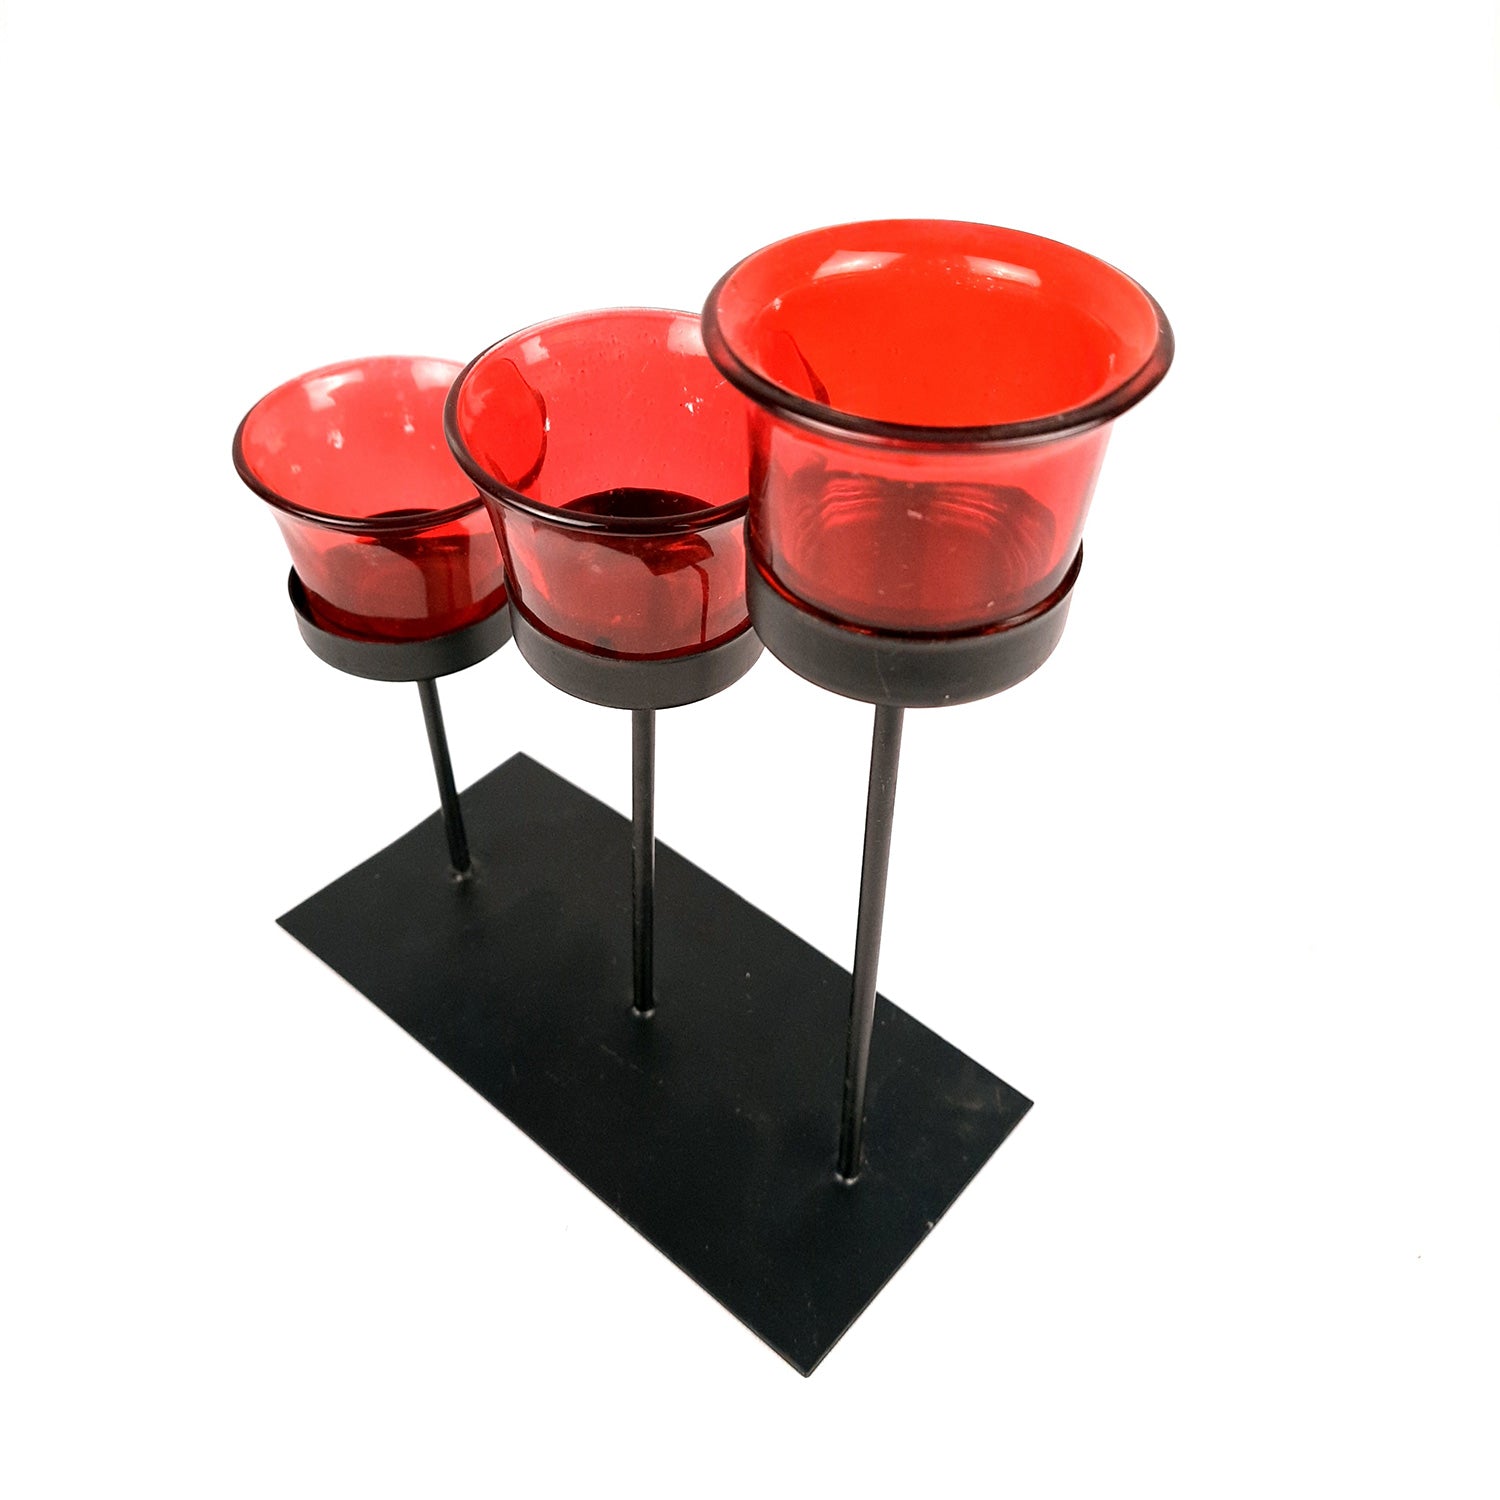 Tealight Candle Stand With 3 Glass Votive Holders | T light Holder - For Home, Living room, Table, Shelf Decor & Gift - Apkamart